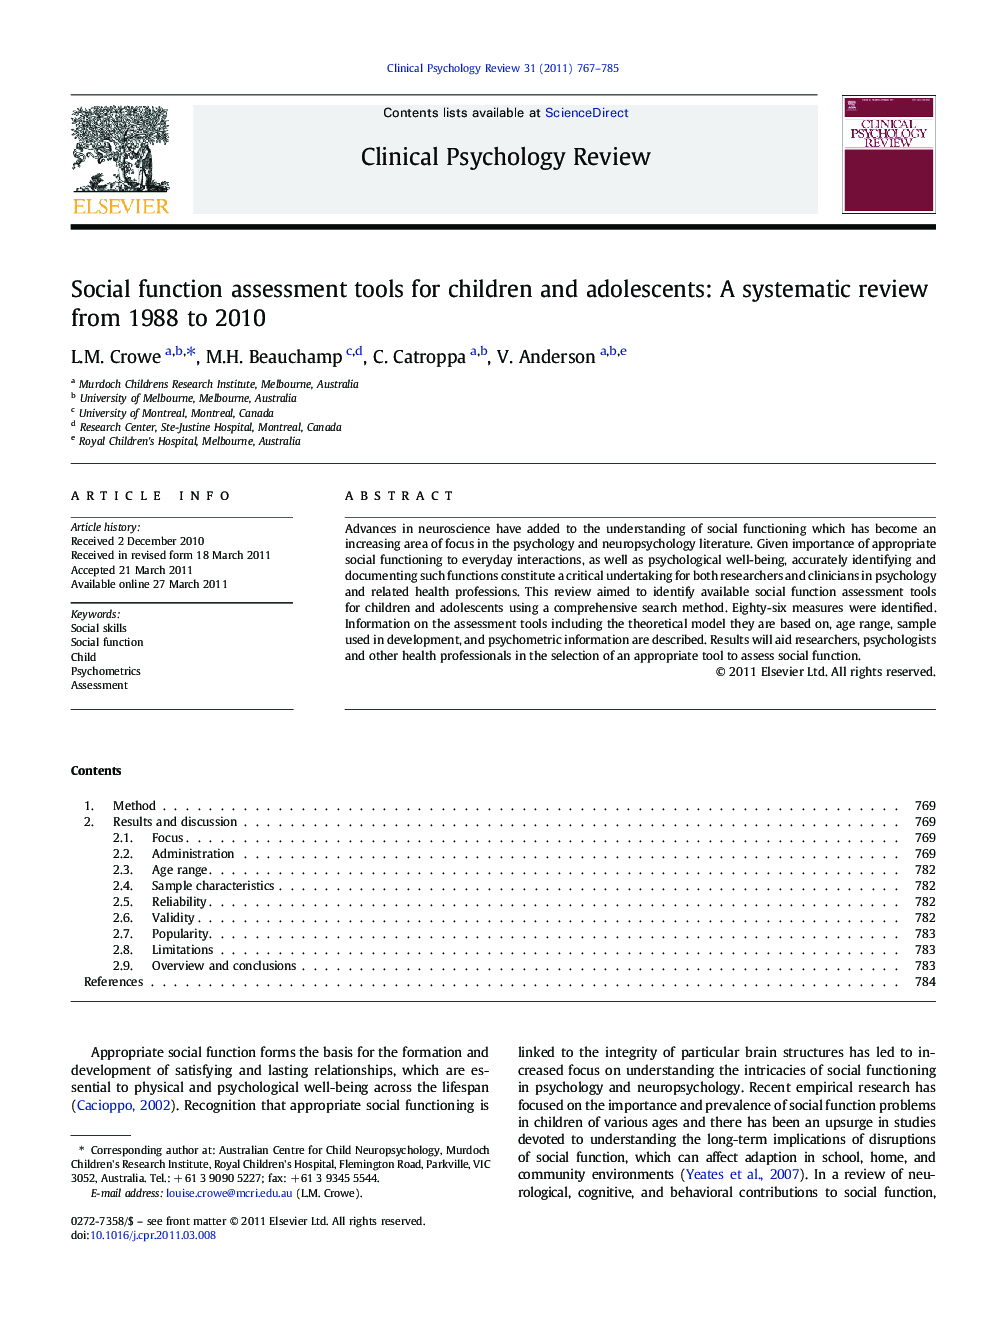 Social function assessment tools for children and adolescents: A systematic review from 1988 to 2010